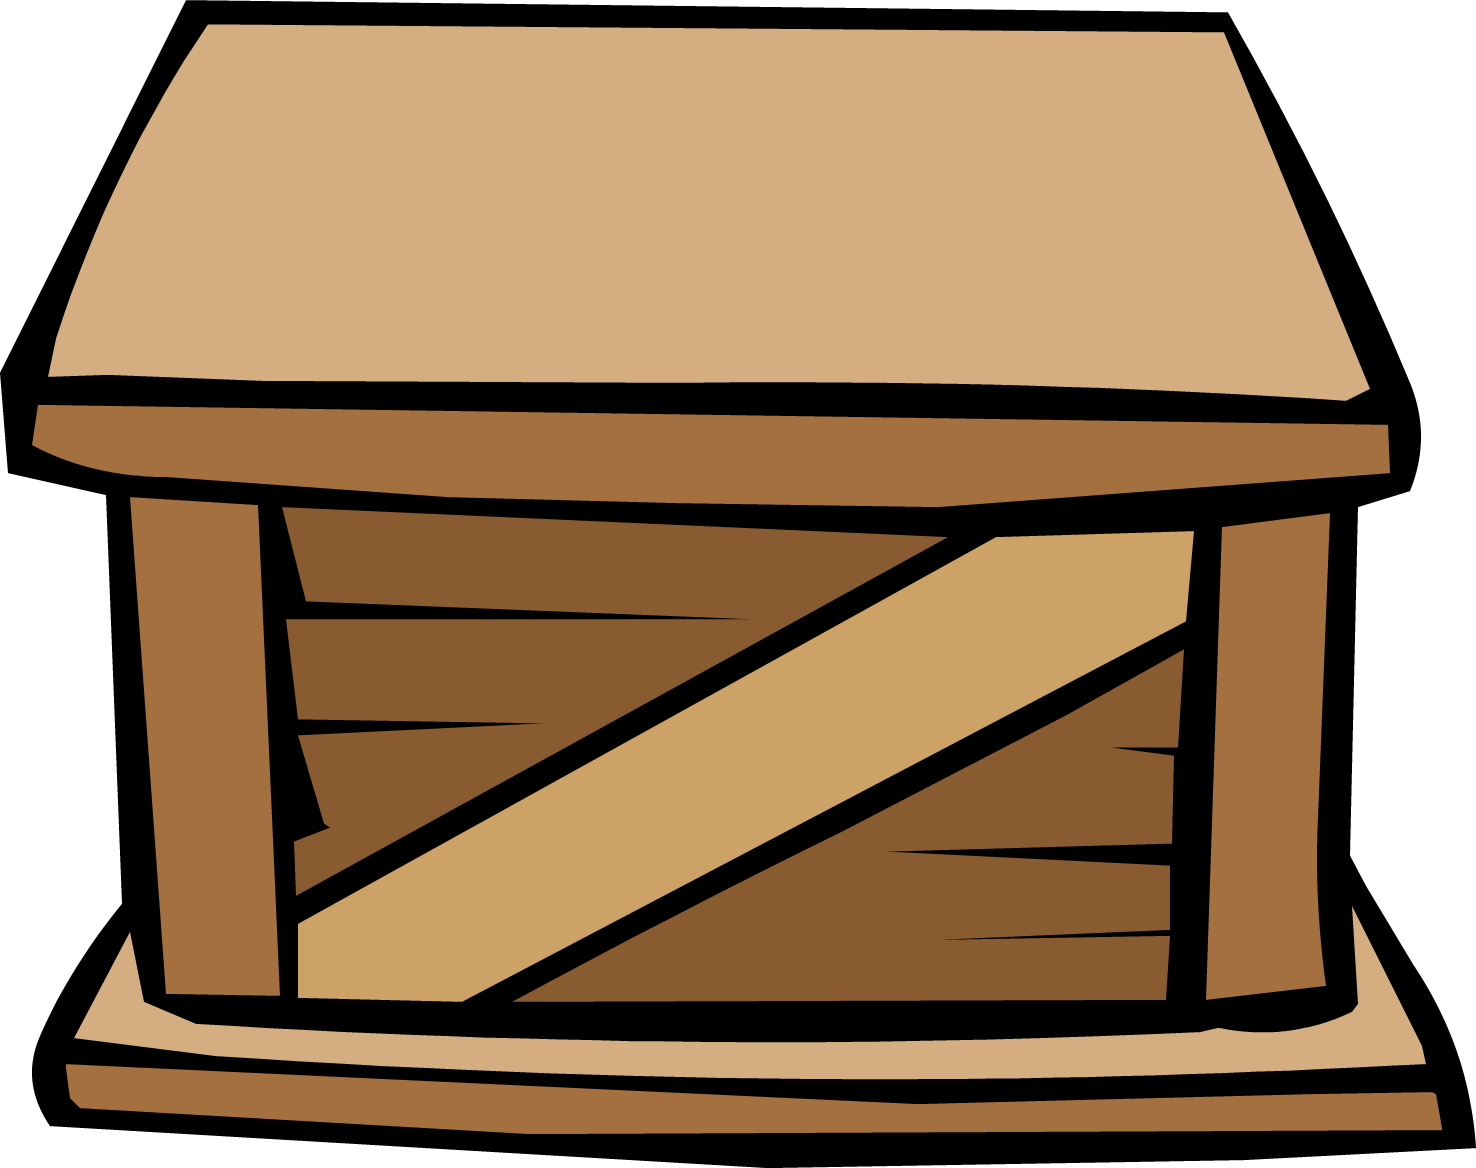 Wooden Crate Sprite 001 - Crate Clipart Png (1476x1168)